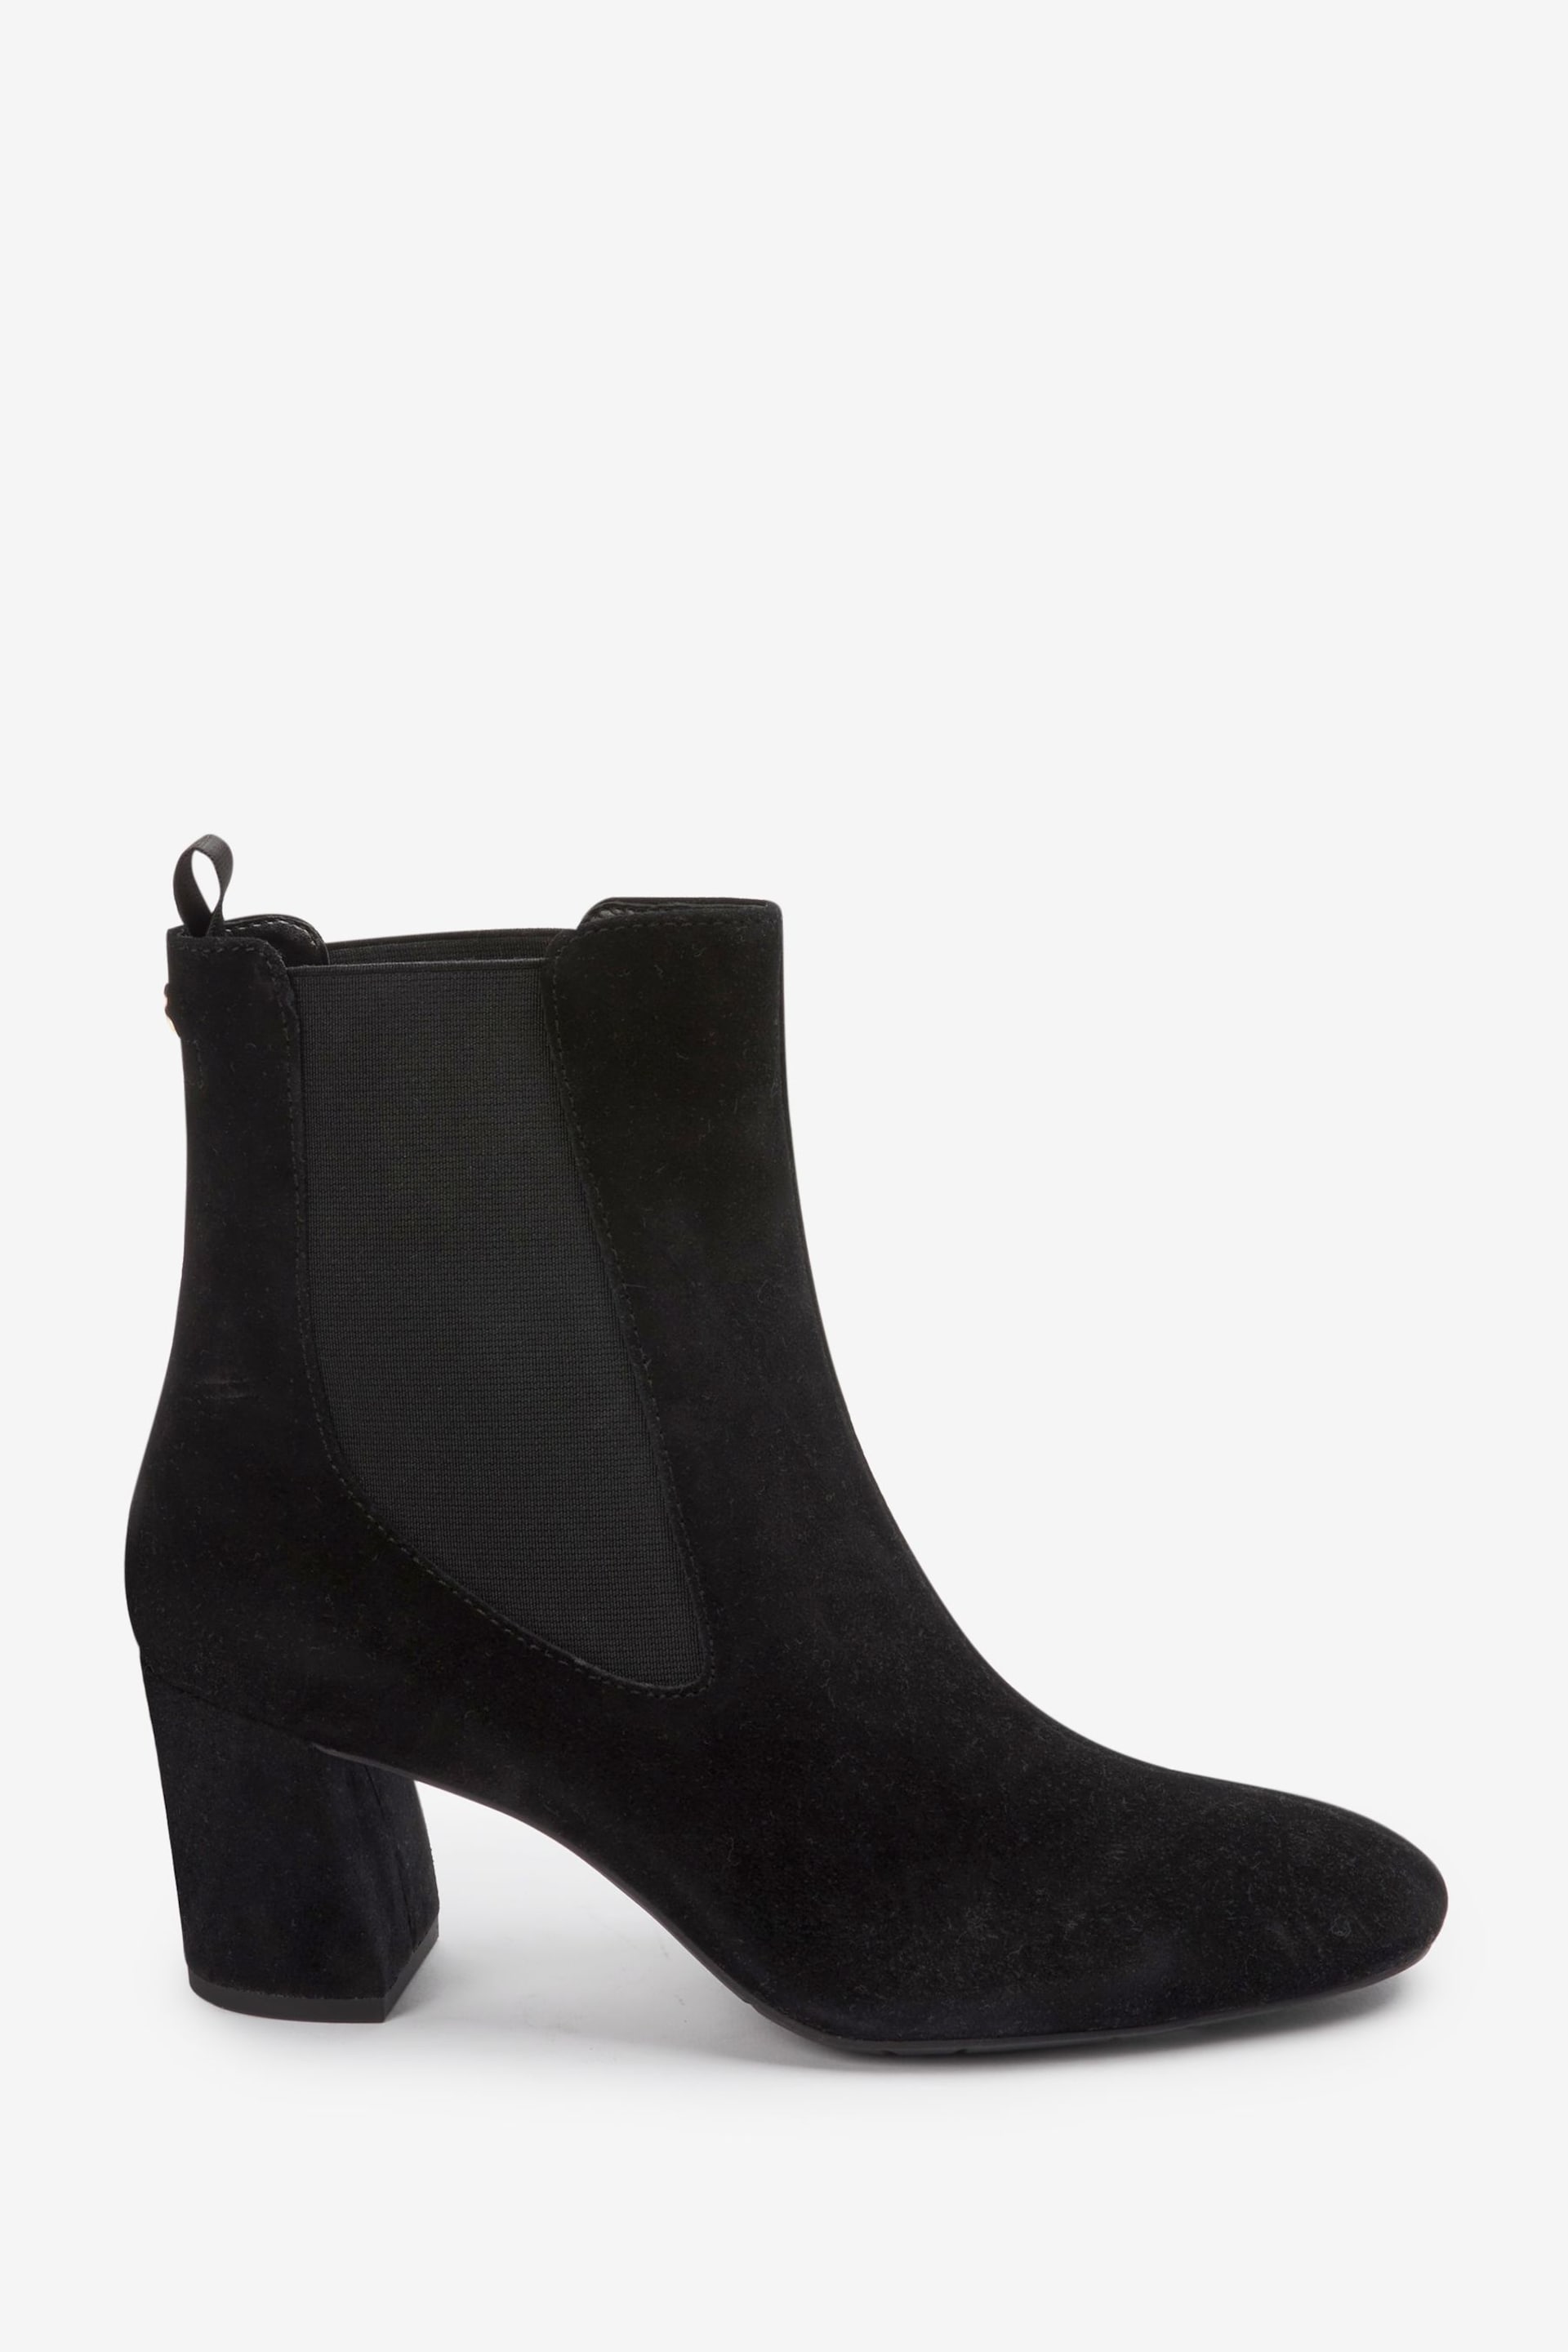 Black Suede Forever Comfort with Motion Flex Heeled Chelsea Boots - Image 6 of 7